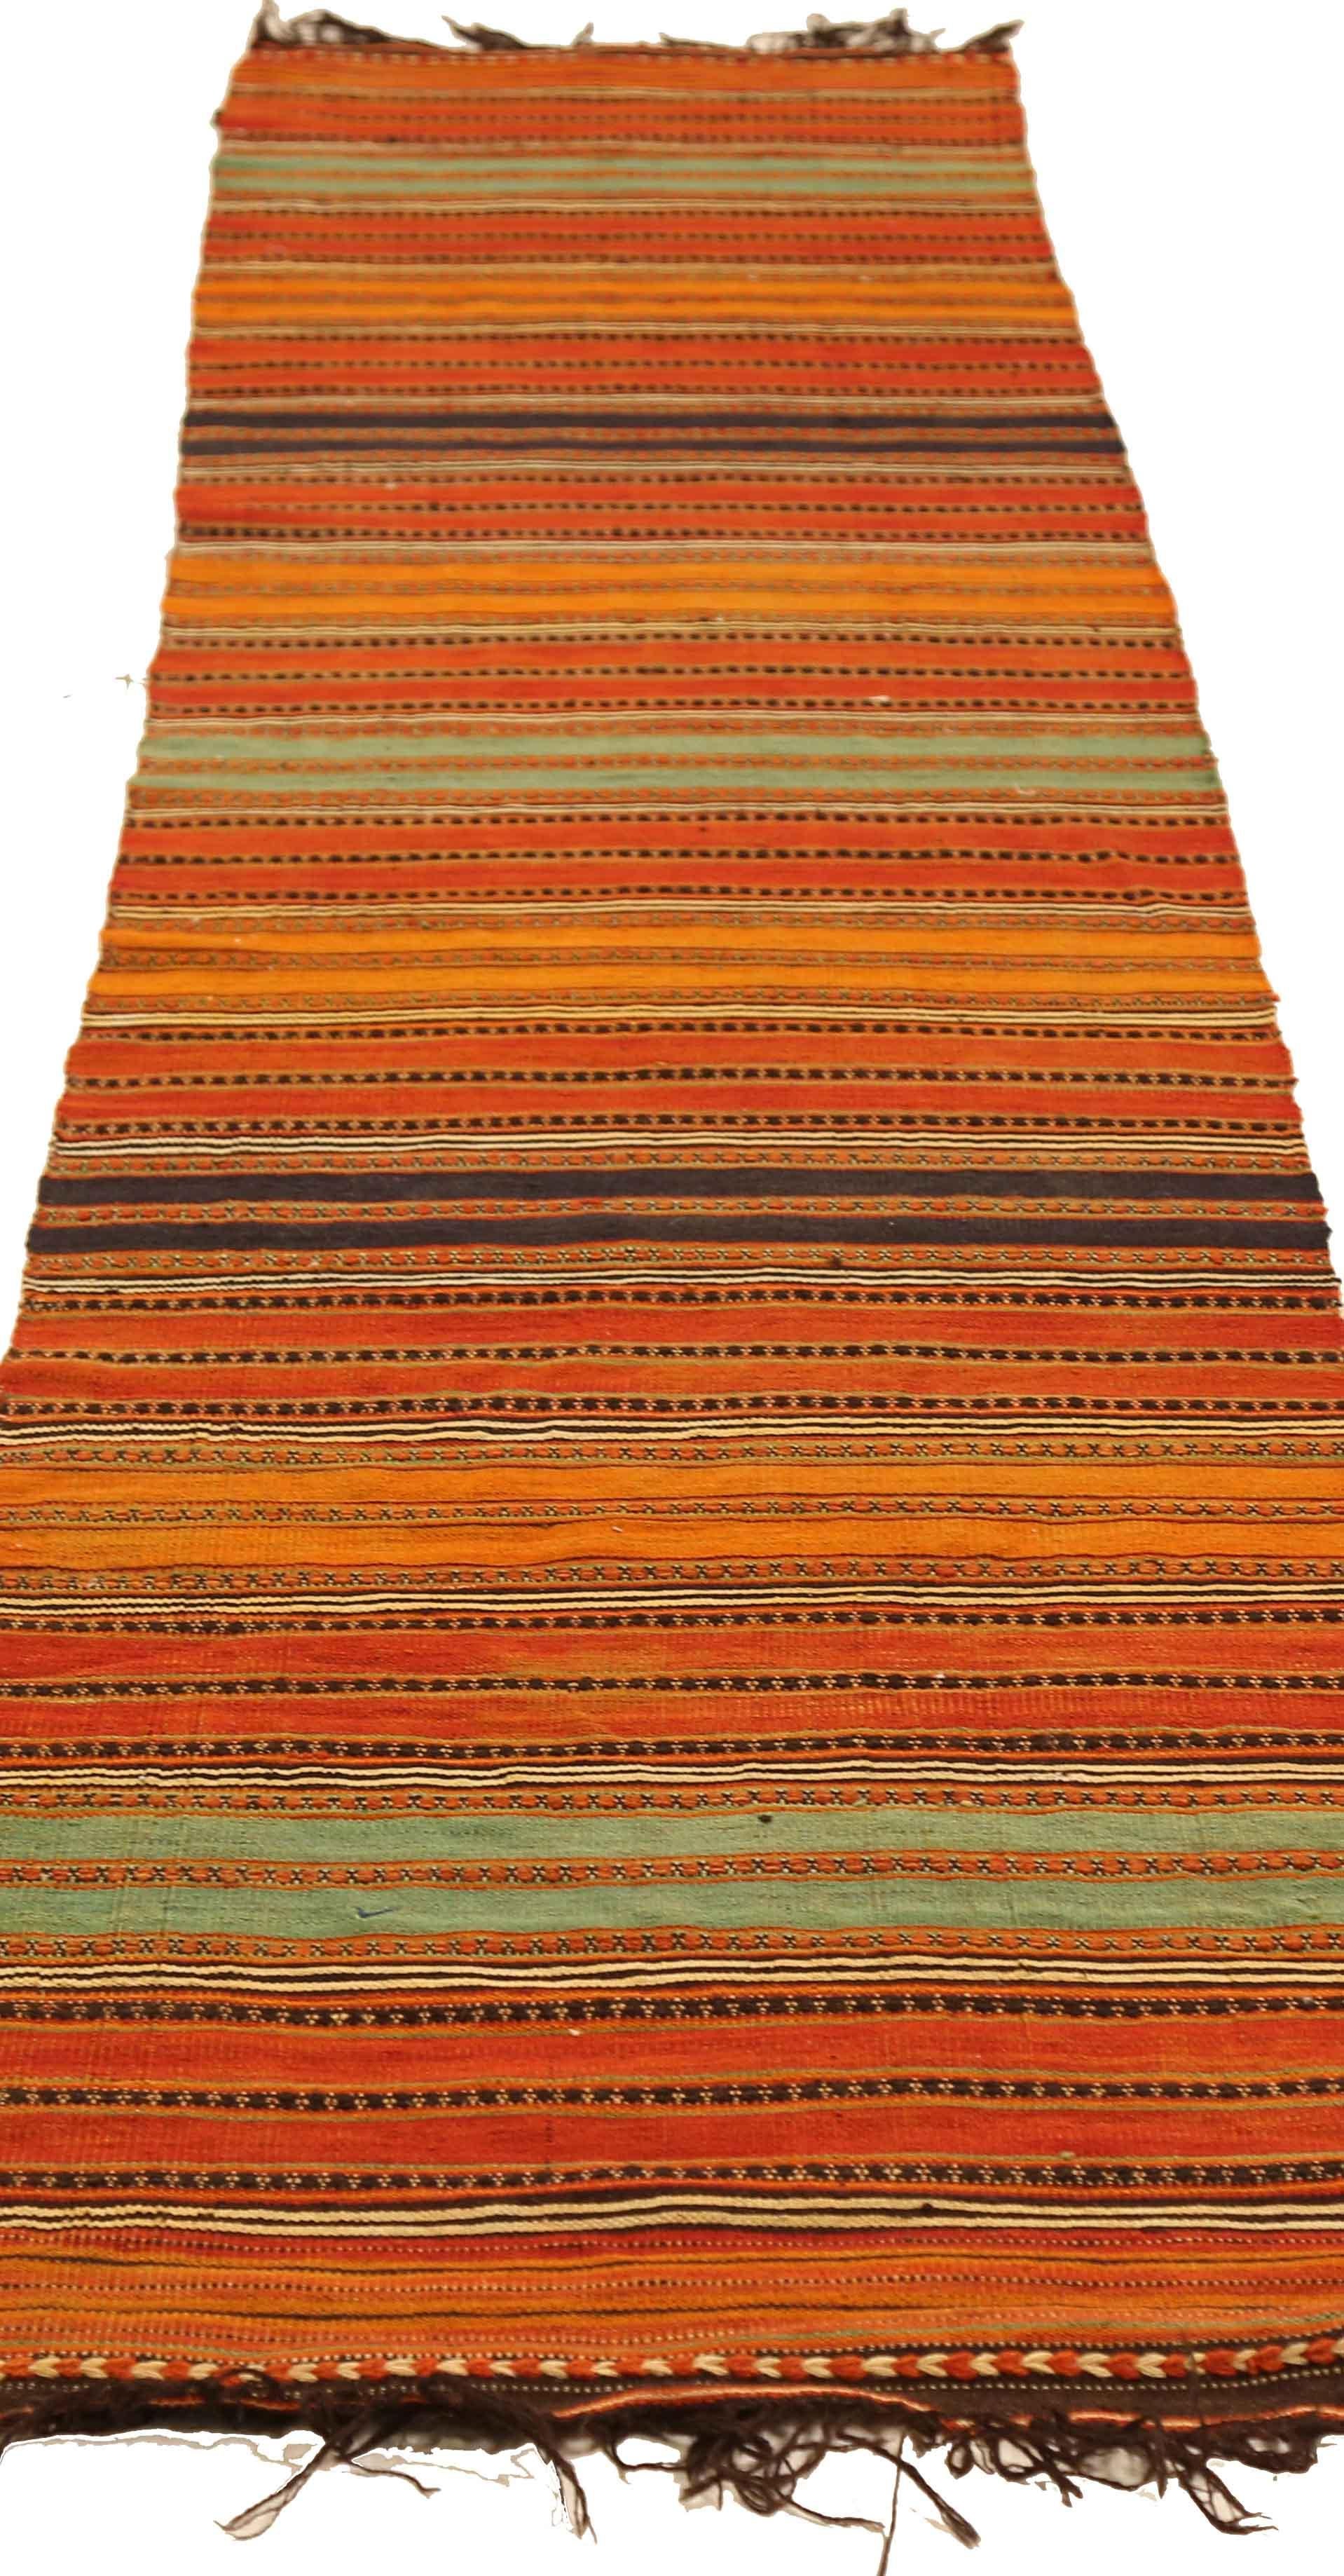 Antique handmade Persian runner rug from high quality sheep’s wool and colored with eco-friendly vegetable dyes that are proven safe for humans and pets alike. It’s a Classic Kilim design showcasing vibrant colored stripes. It’s a lovely piece that